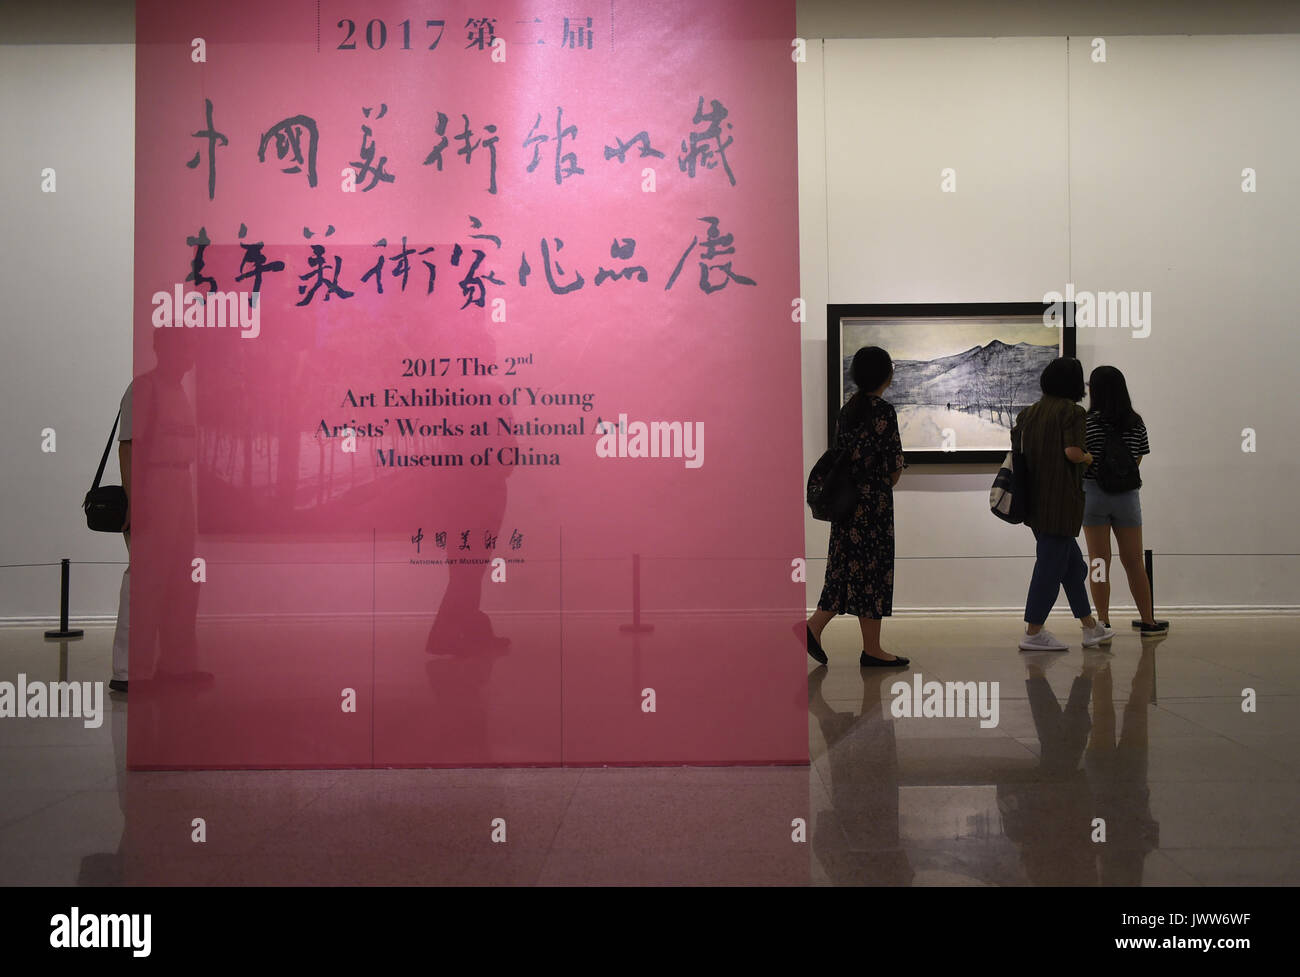 Beijing, China. 13th Aug, 2017. Visitors view exhibits at National Art Museum of China in Beijing, capital of China, Aug. 13, 2017. The Second Art Exhibition of Young Artists' Works at National Art Museum of China kicked off Sunday in Beijing. About 60 pieces of sculptures and paintings created by young artists from across China were on display. Credit: Lu Peng/Xinhua/Alamy Live News Stock Photo